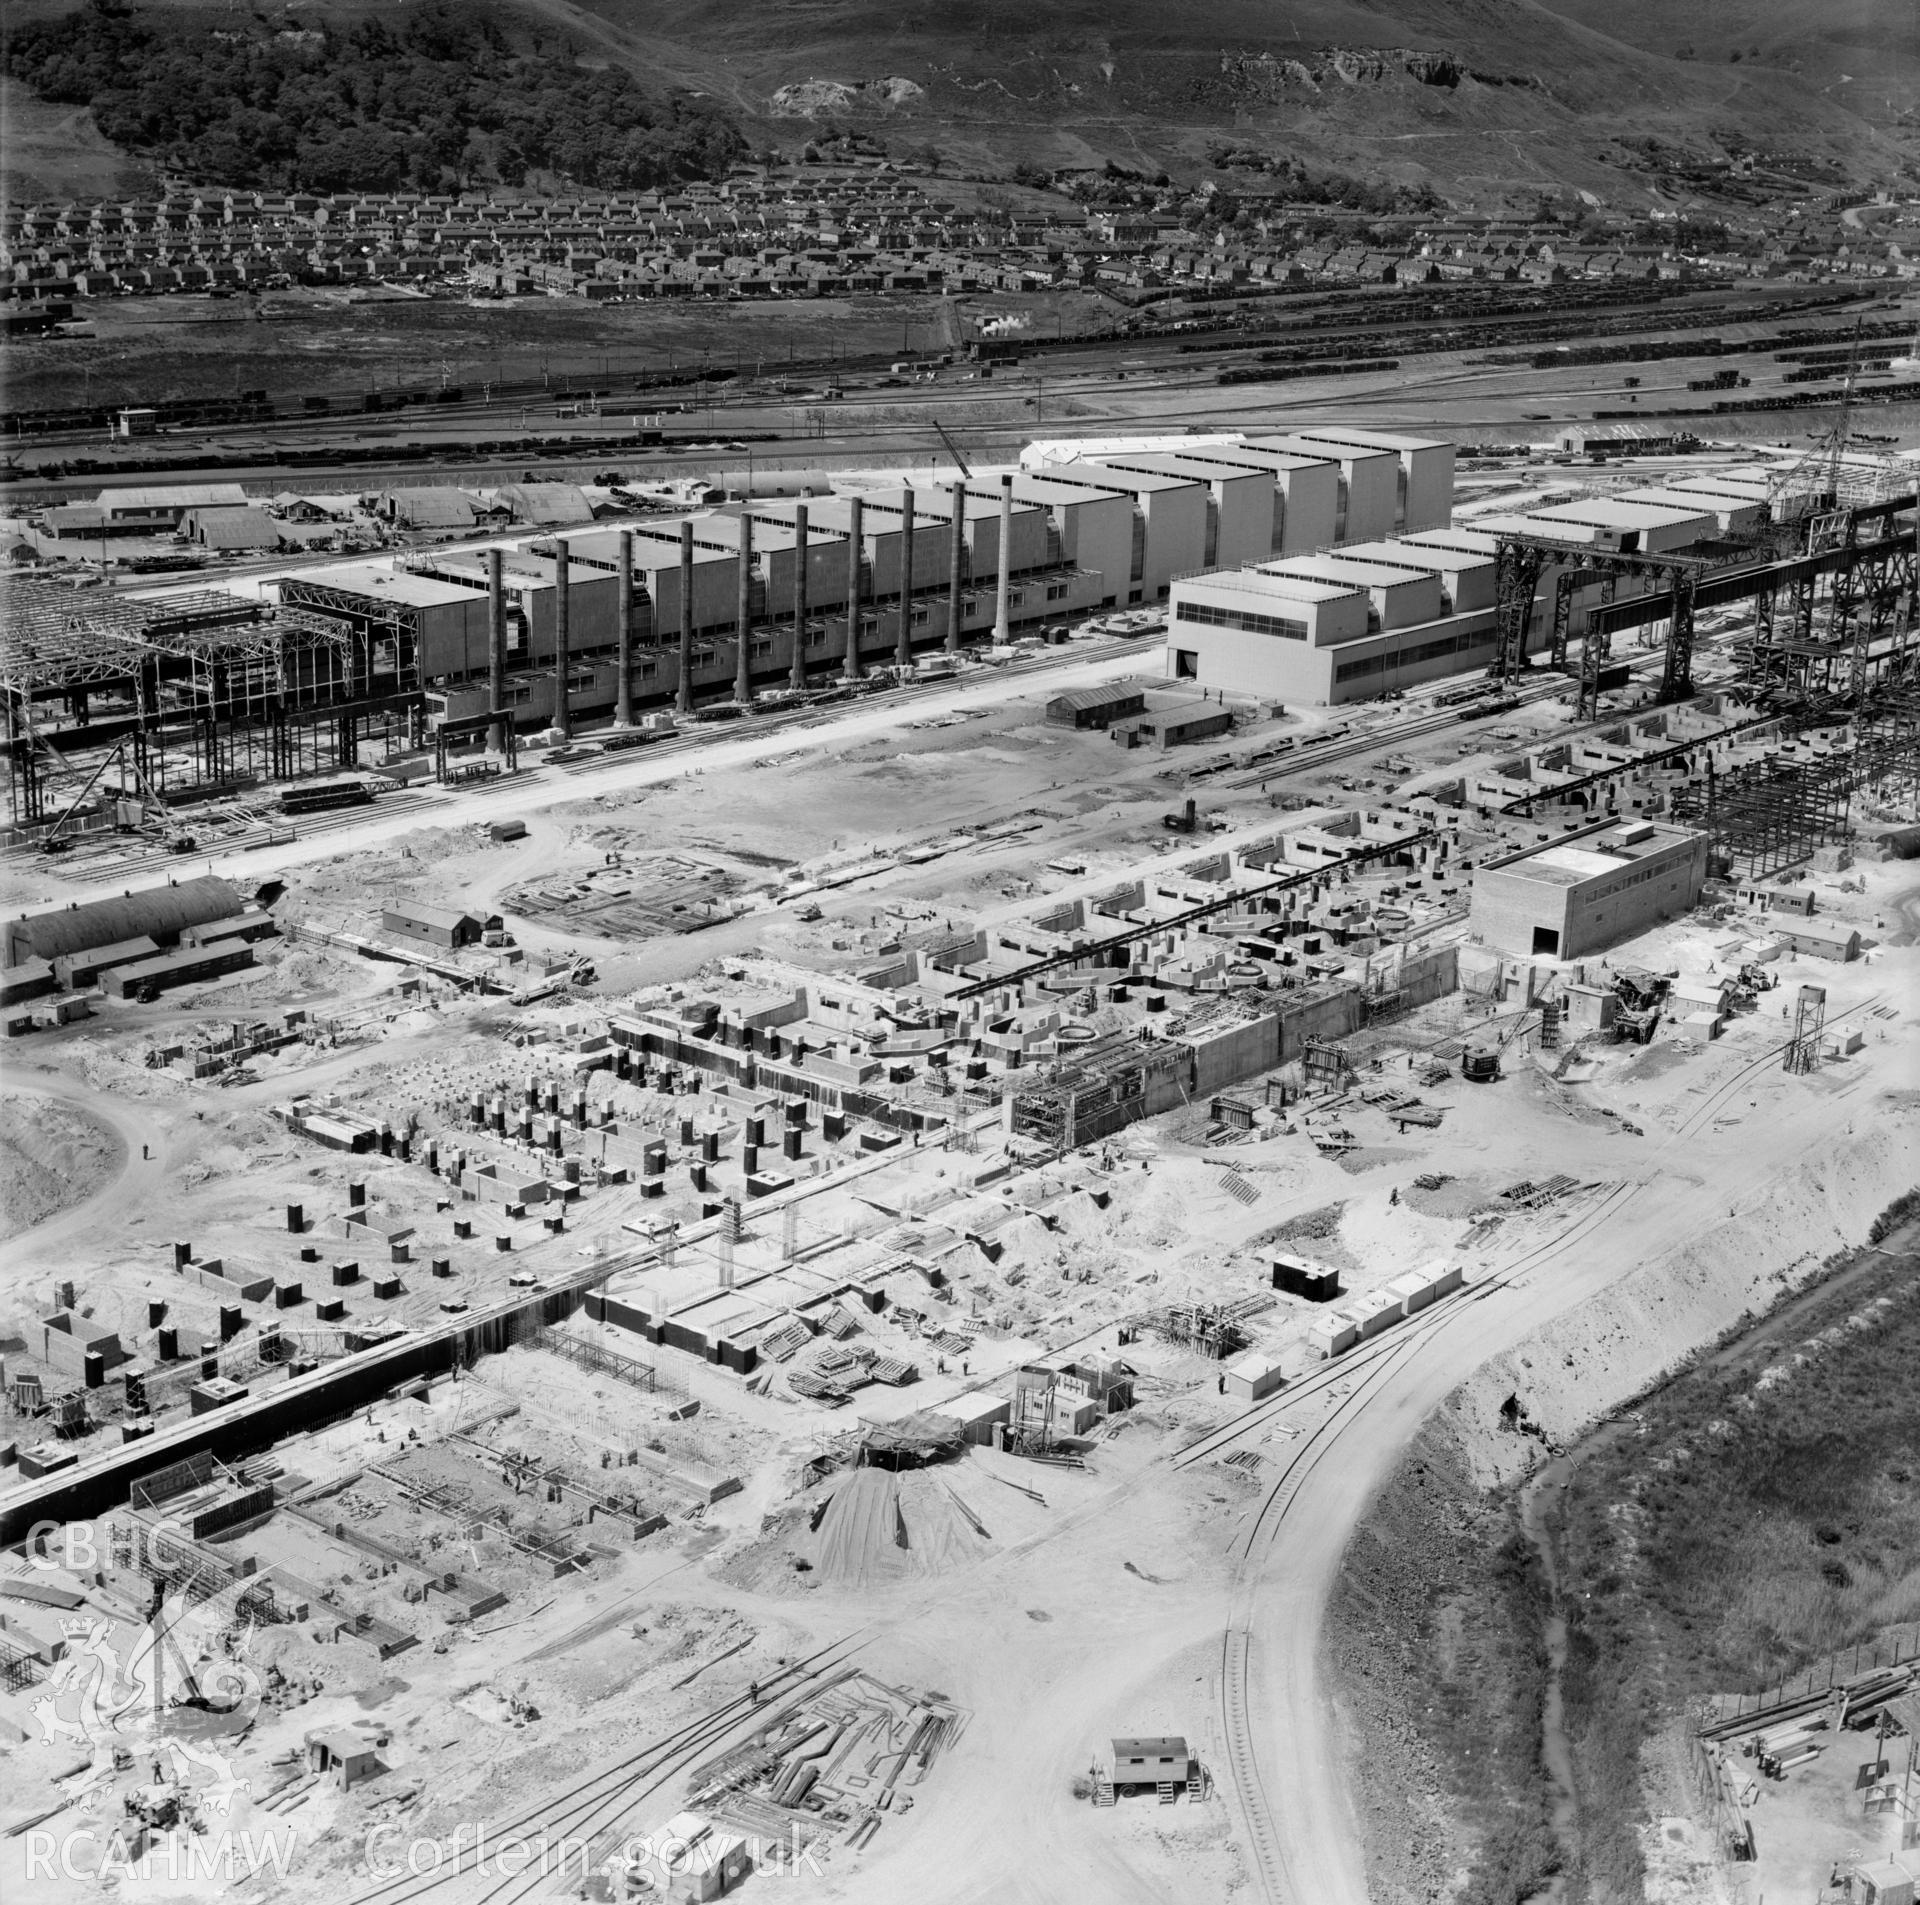 View of Abbey steelworks, Port Talbot, under construction